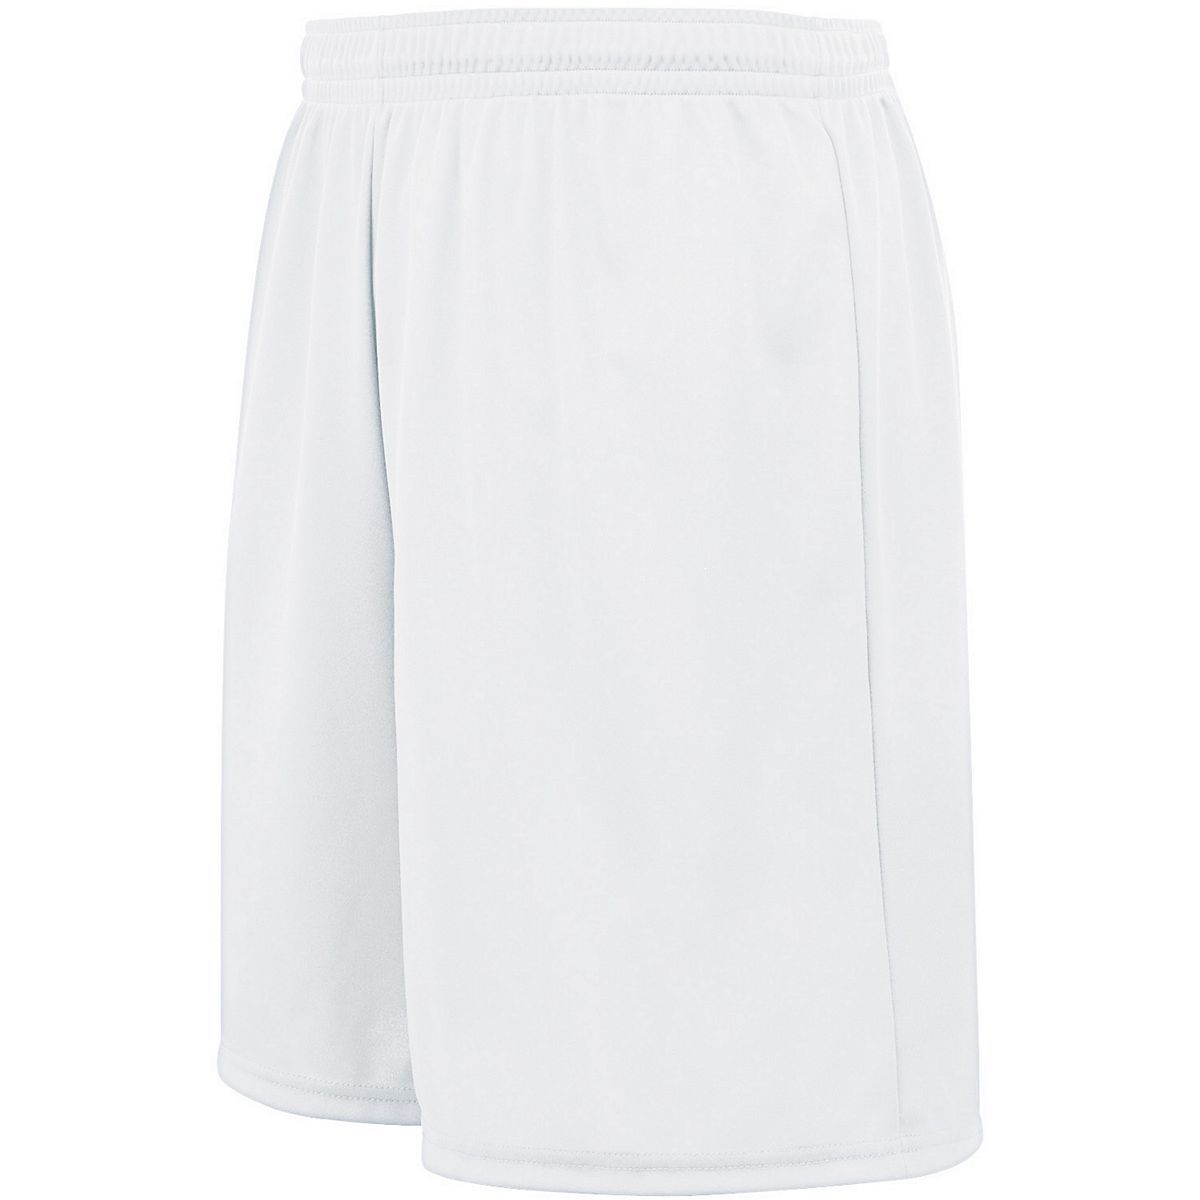 High 5 Youth Primo Shorts in White  -Part of the Youth, Youth-Shorts, High5-Products, Soccer, All-Sports-1 product lines at KanaleyCreations.com